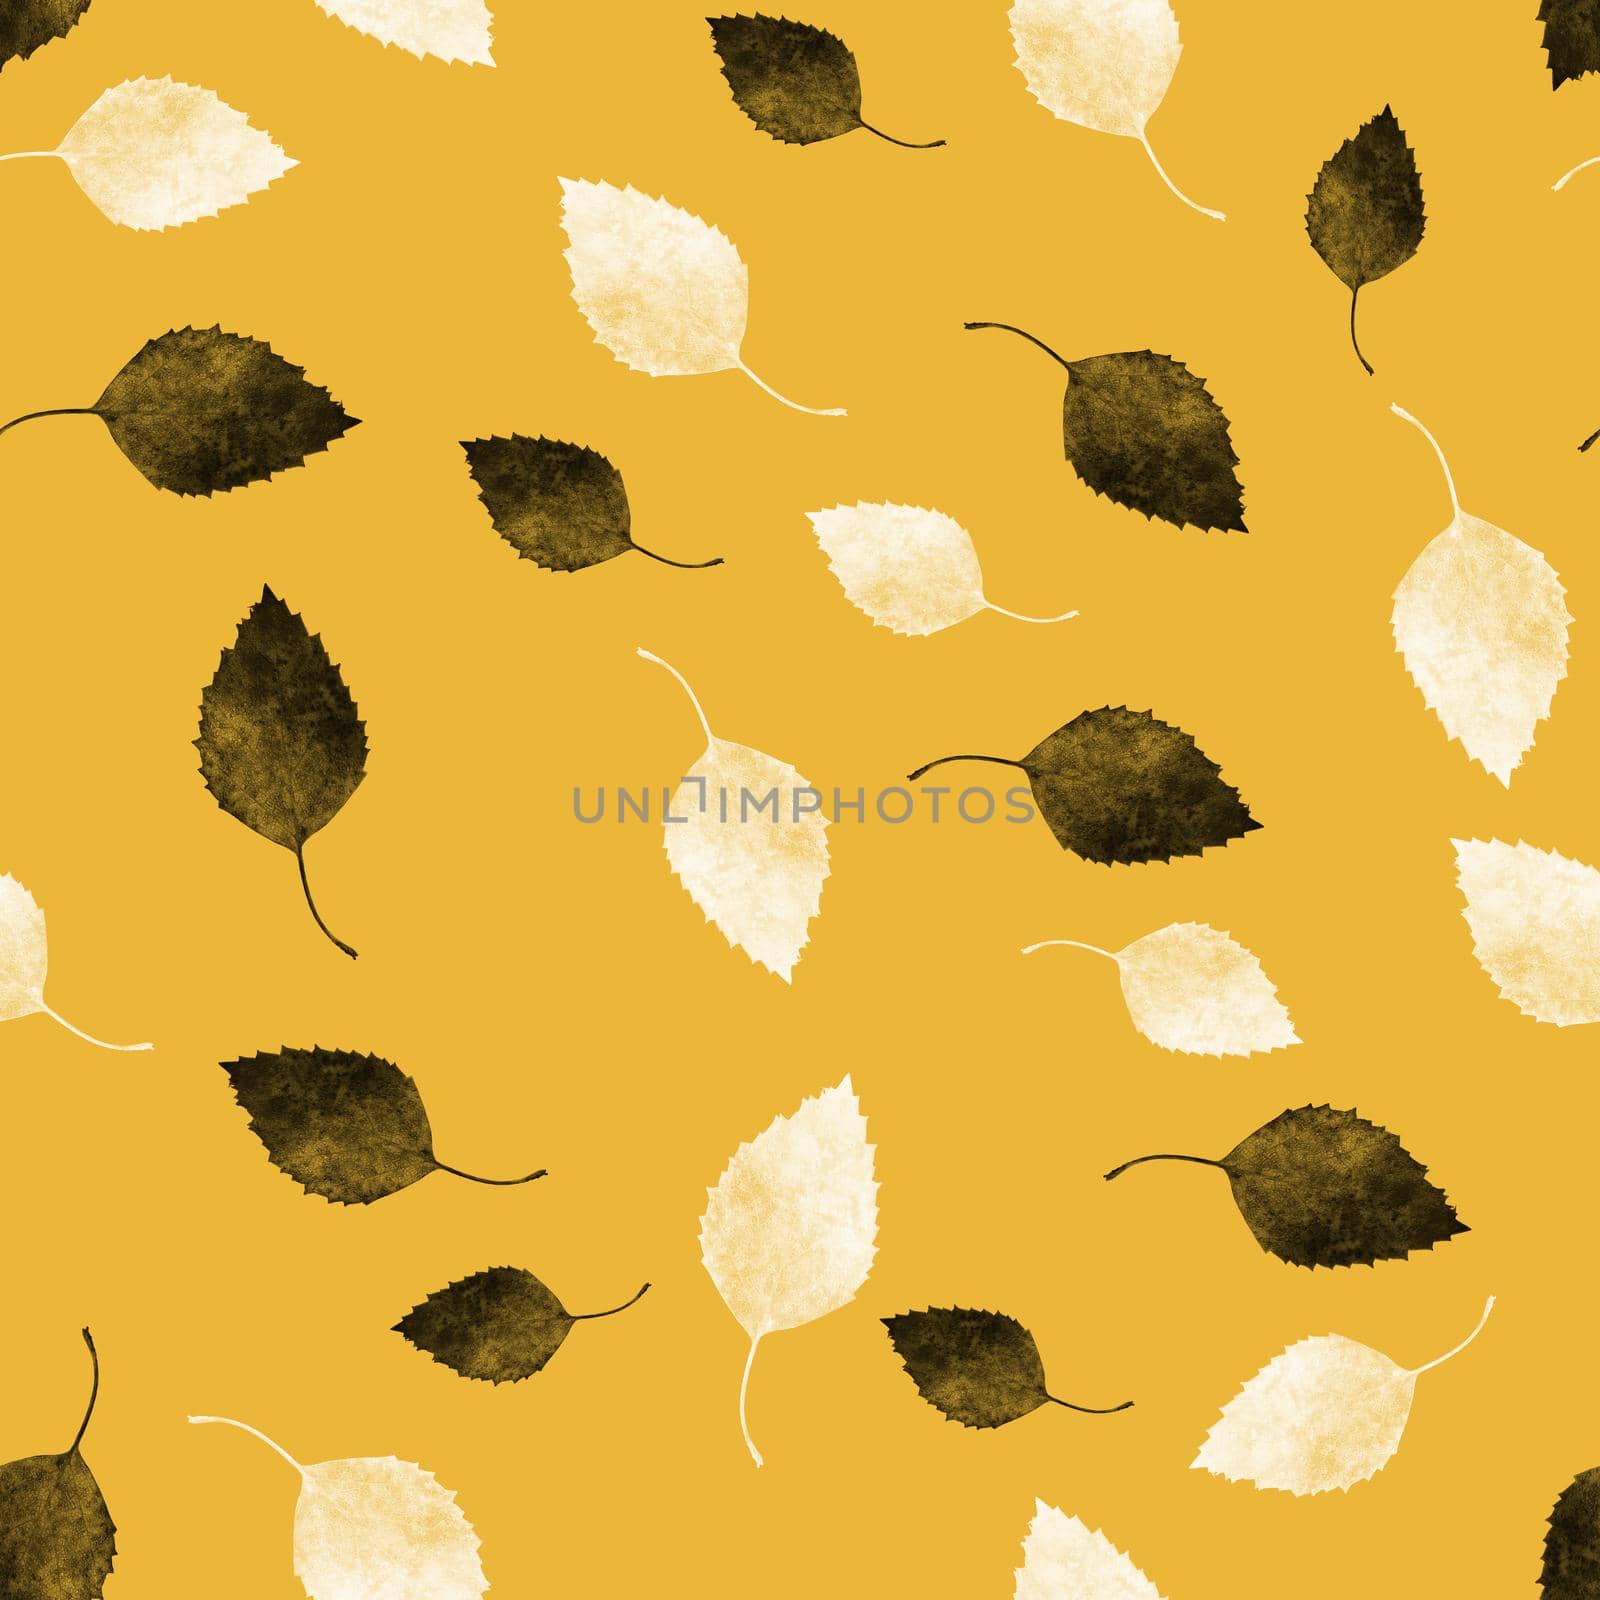 black and white vintage print effect leaves seamless pattern on a yellow mid century colored background by philopenshaw